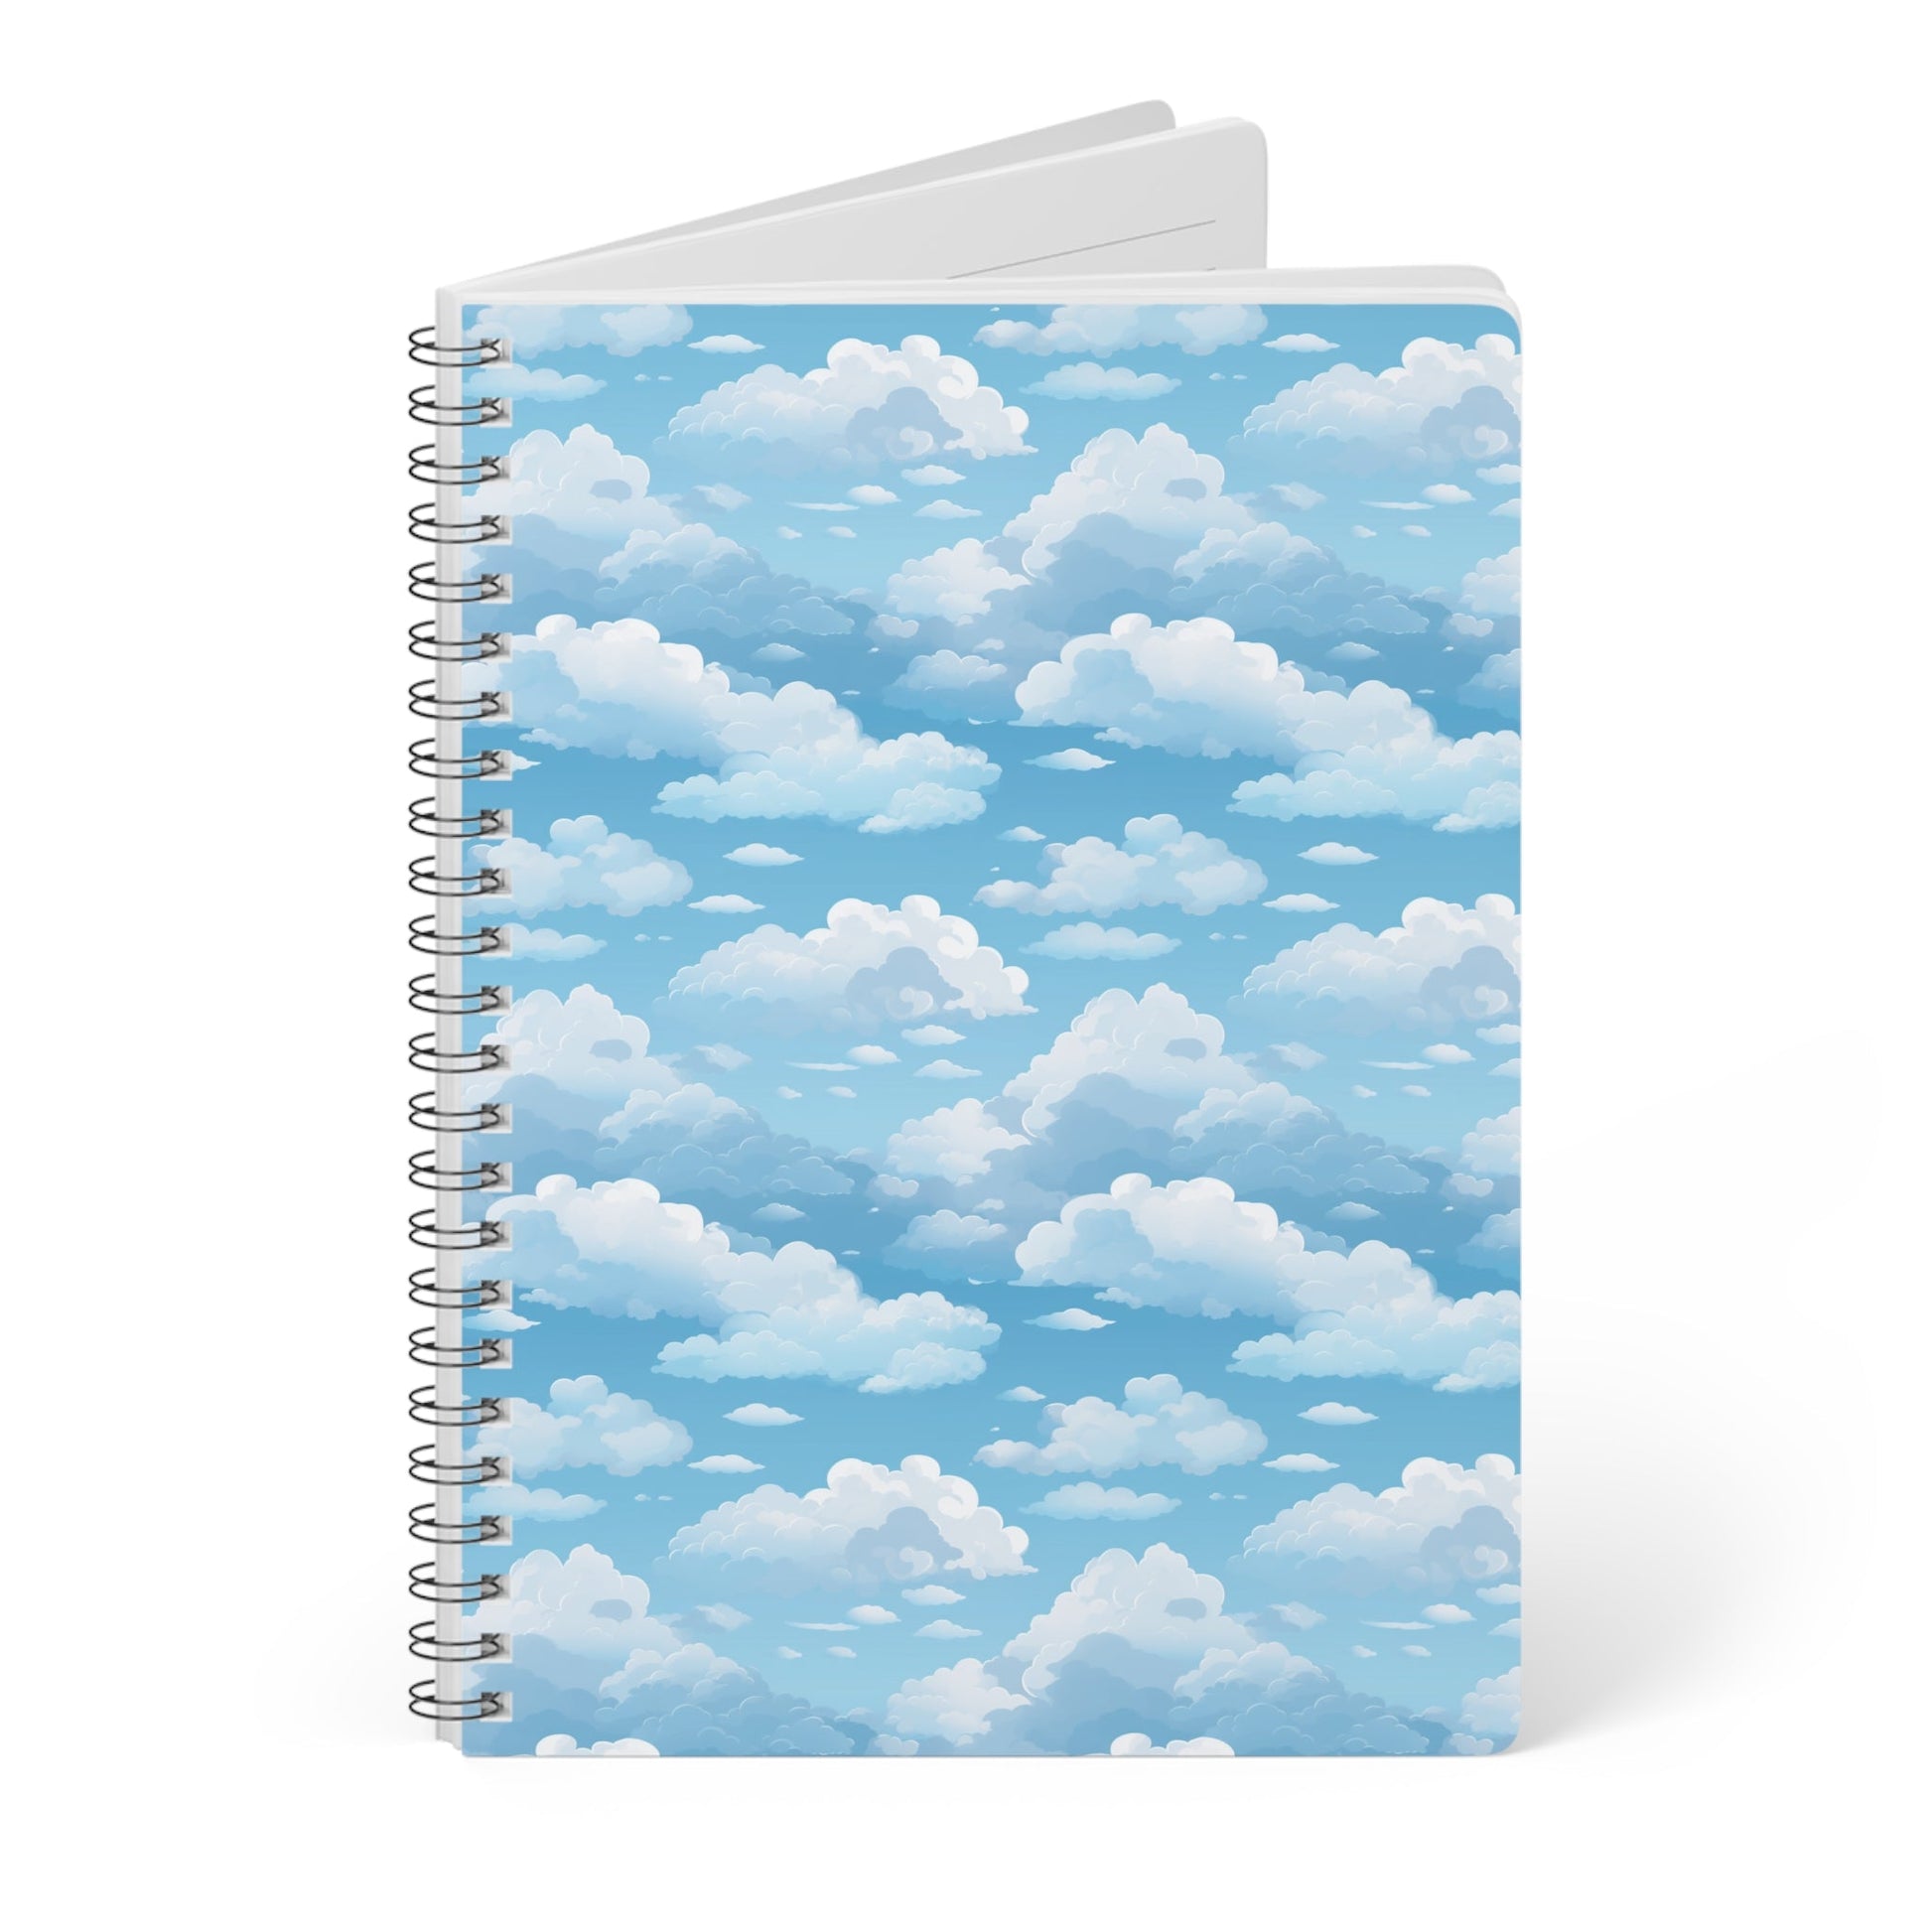 Boundless Azure Horizon - Calm Sky Design Spiral Notebook - Perfect for Journaling, Note-taking, and Sketching Paper products Pattern Symphony   